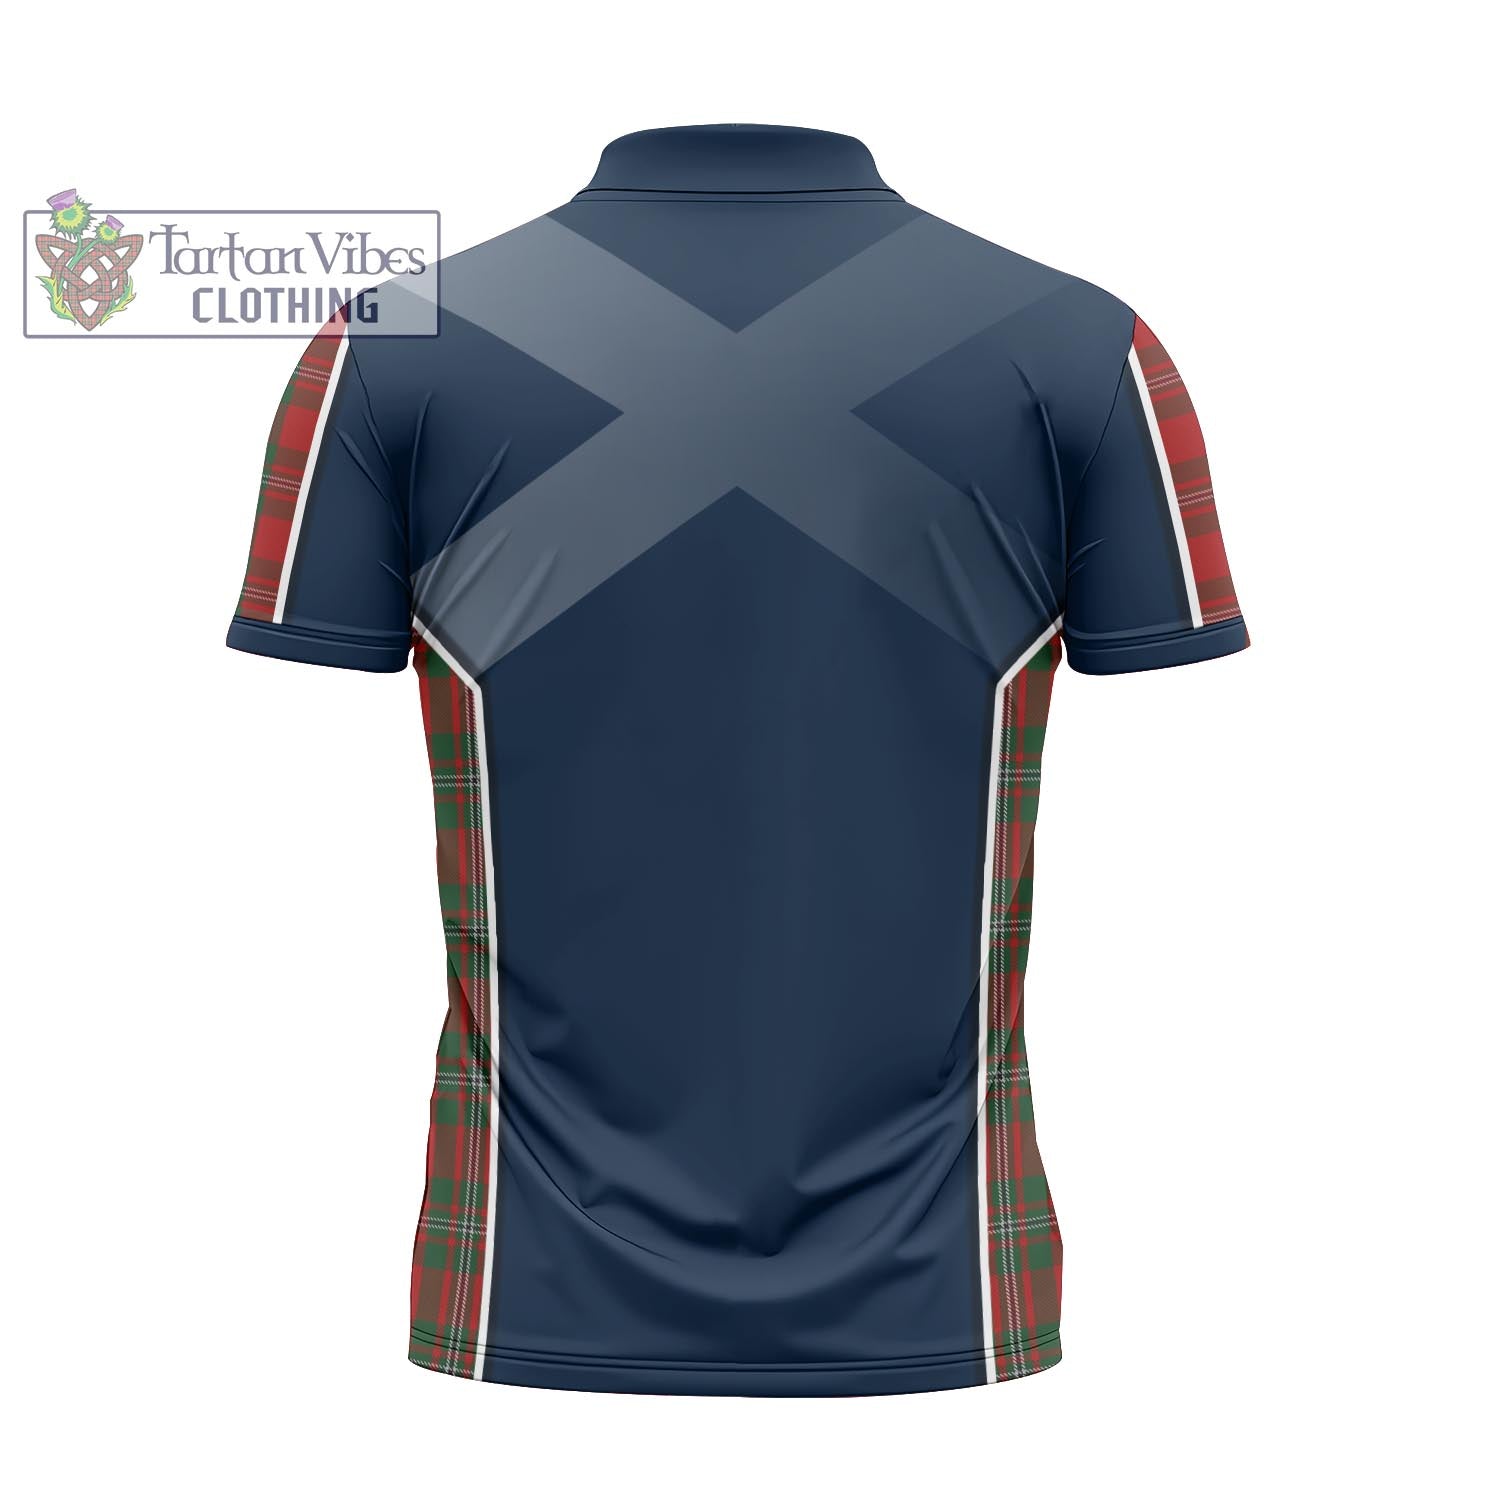 Tartan Vibes Clothing MacGregor Tartan Zipper Polo Shirt with Family Crest and Scottish Thistle Vibes Sport Style